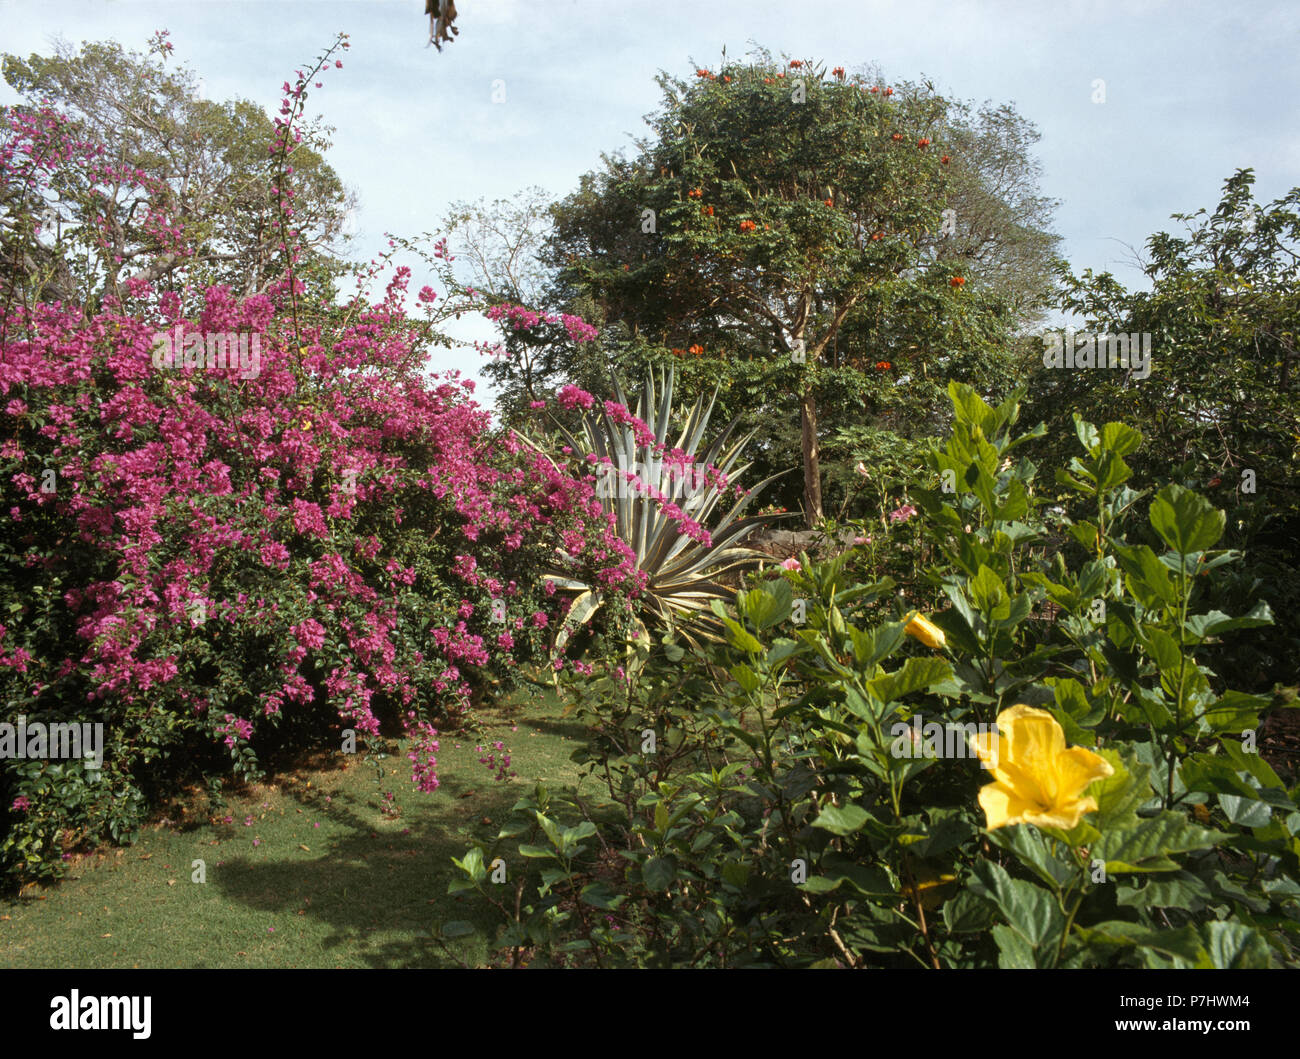 Yellow and pink flowering shrubs in Caribbean garden Stock Photo